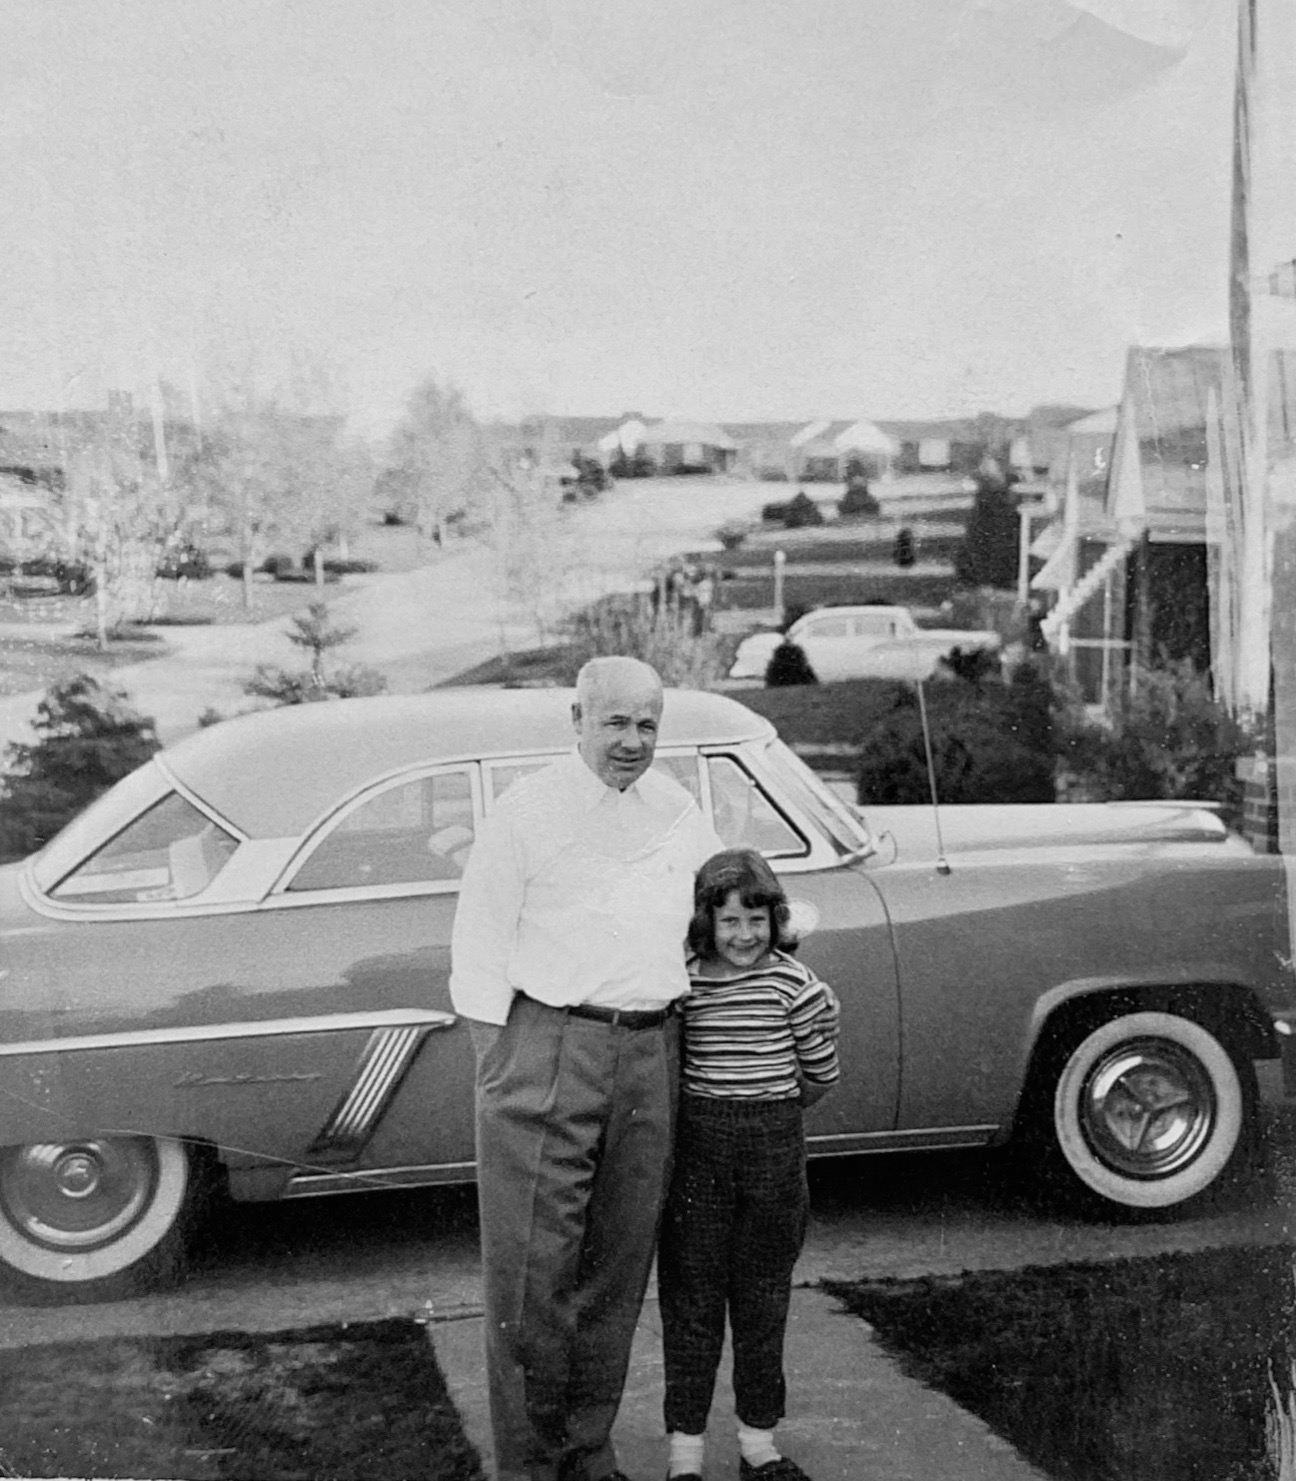 Patti looks pretty happy having her photograph taken with her Dad, Morgan Lingenfelter. LINGENFELTER FAMILY COLLECTION